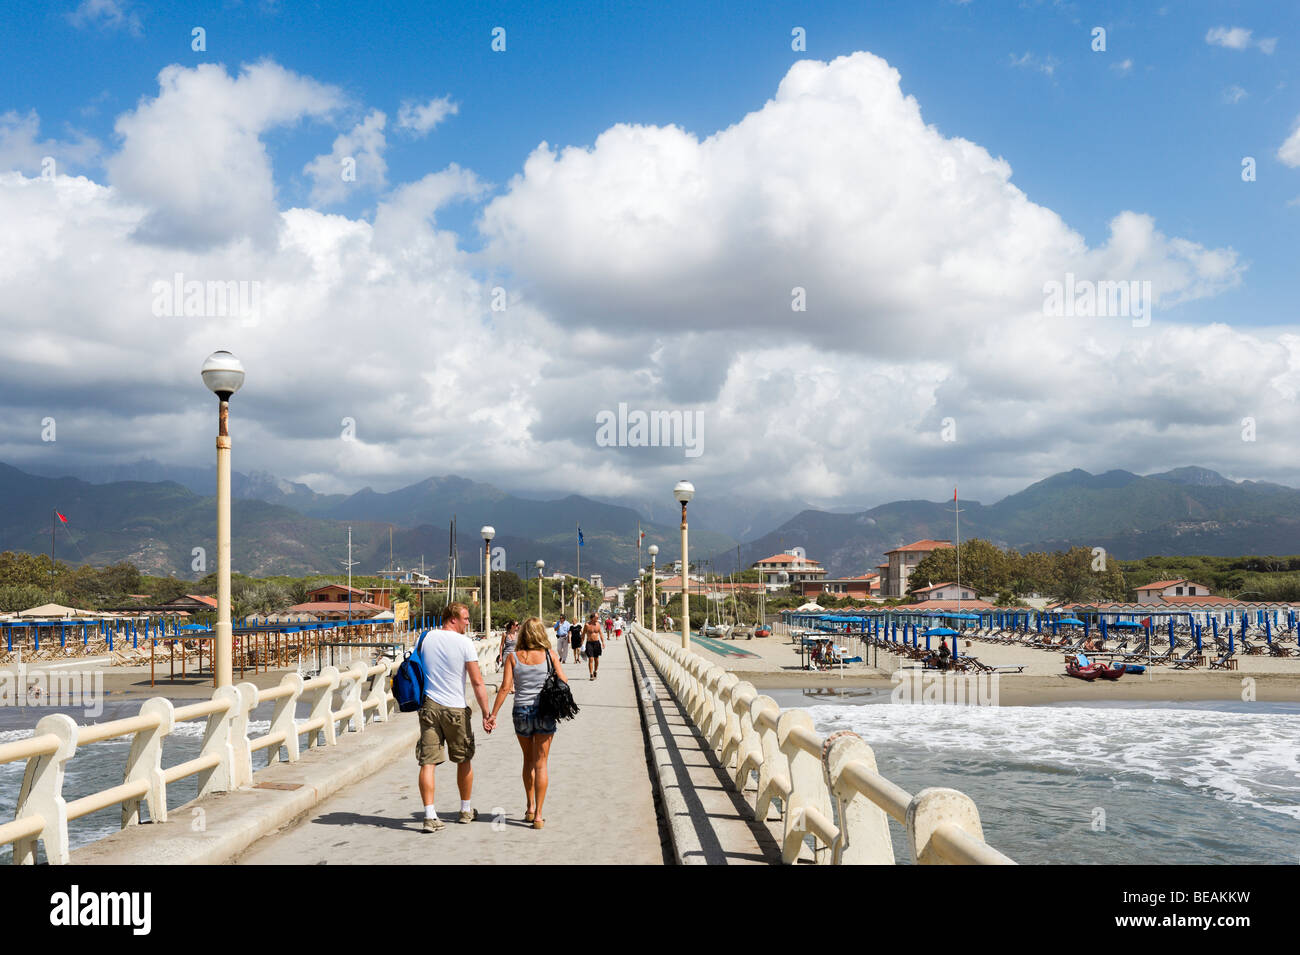 Pier at Forte dei Marmi looking towards the mountains and resort centre, Tuscan Riviera, Tuscany, Italy Stock Photo